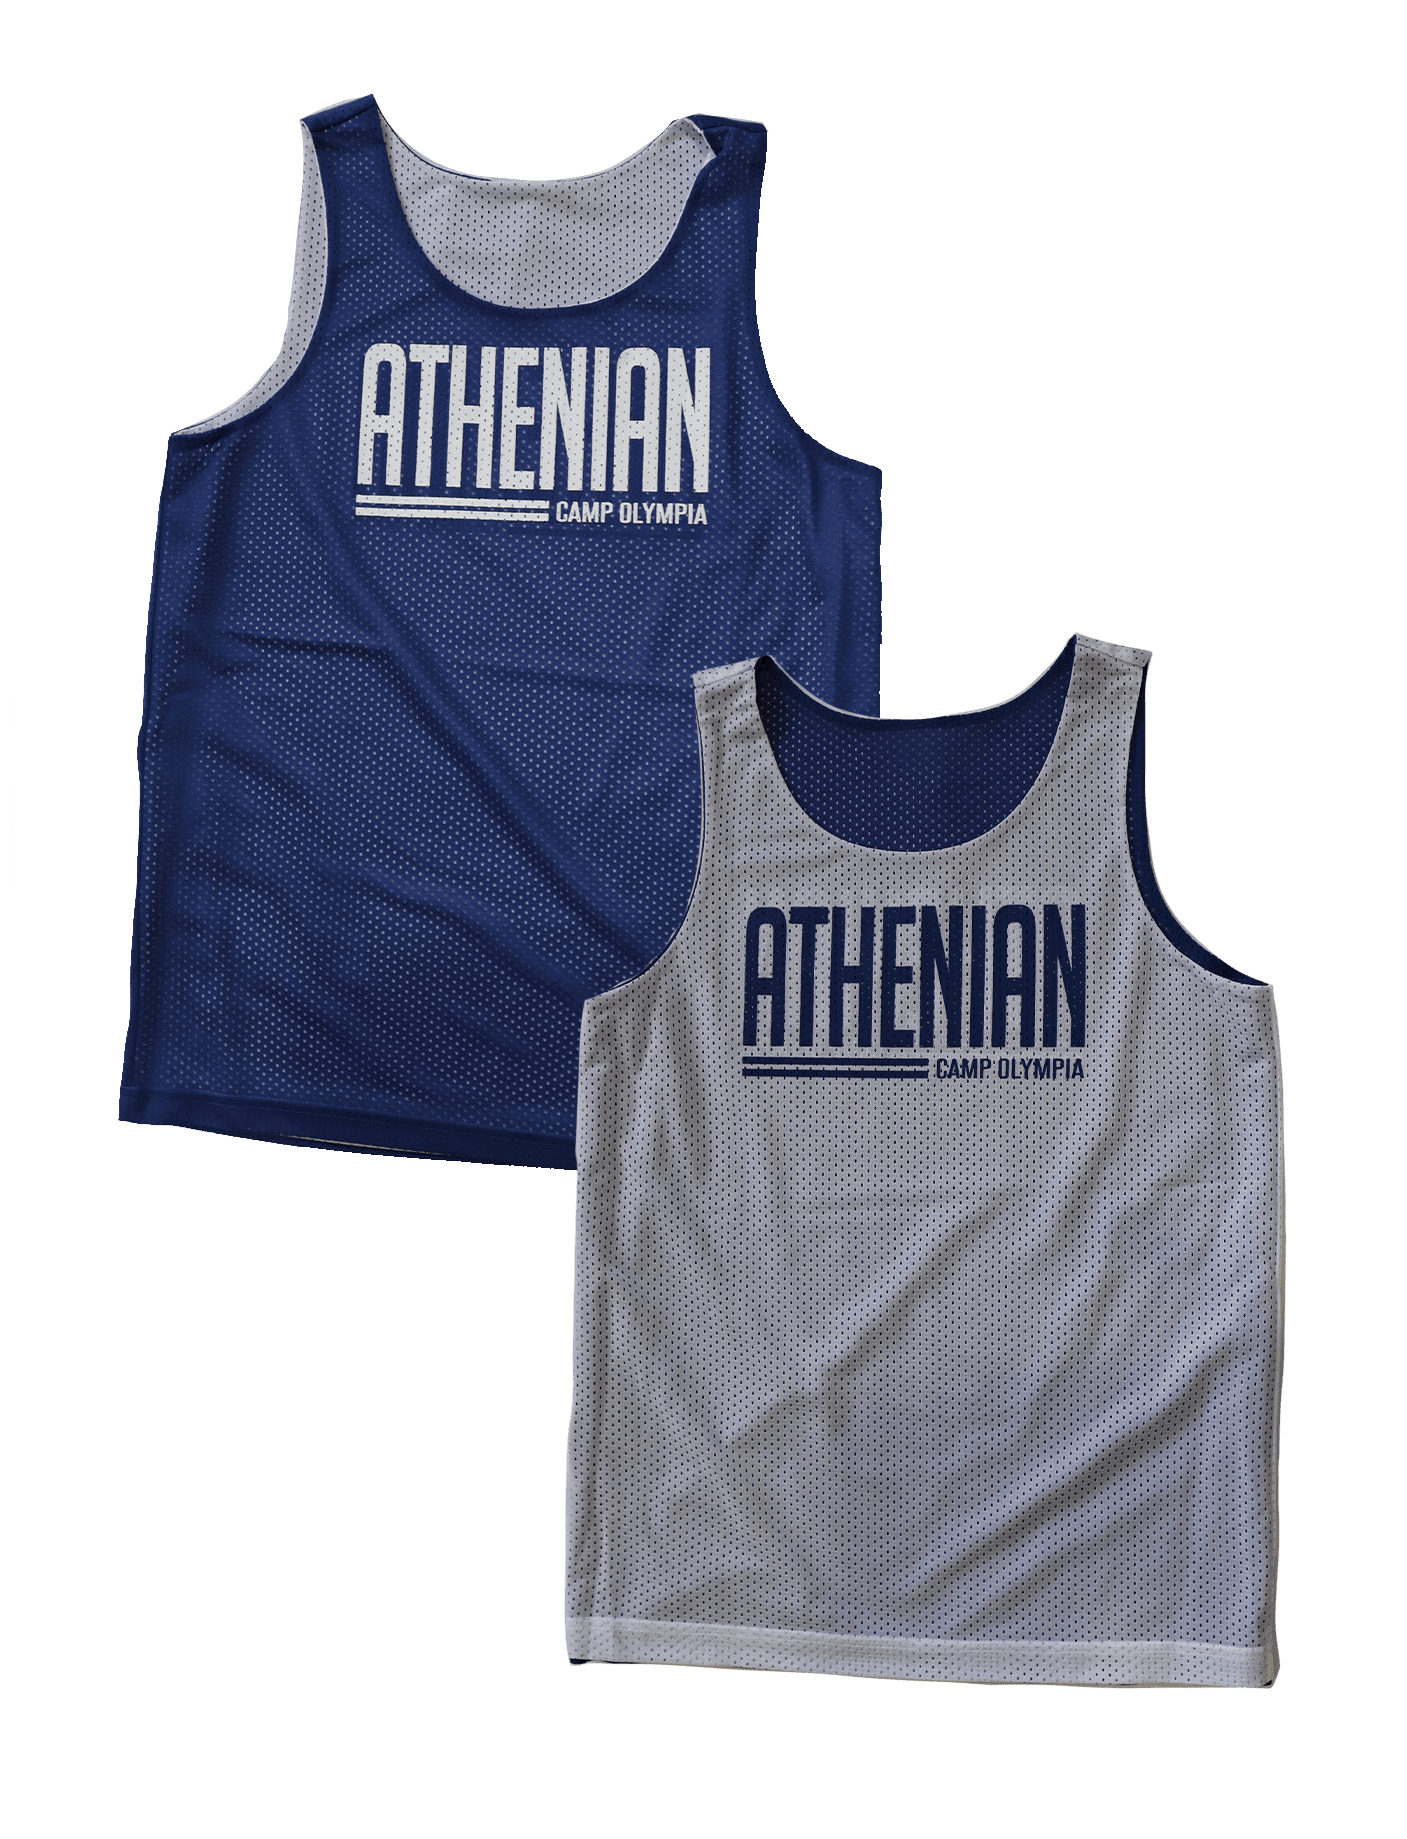 Athenian Reversible Jersey - Camp Olympia